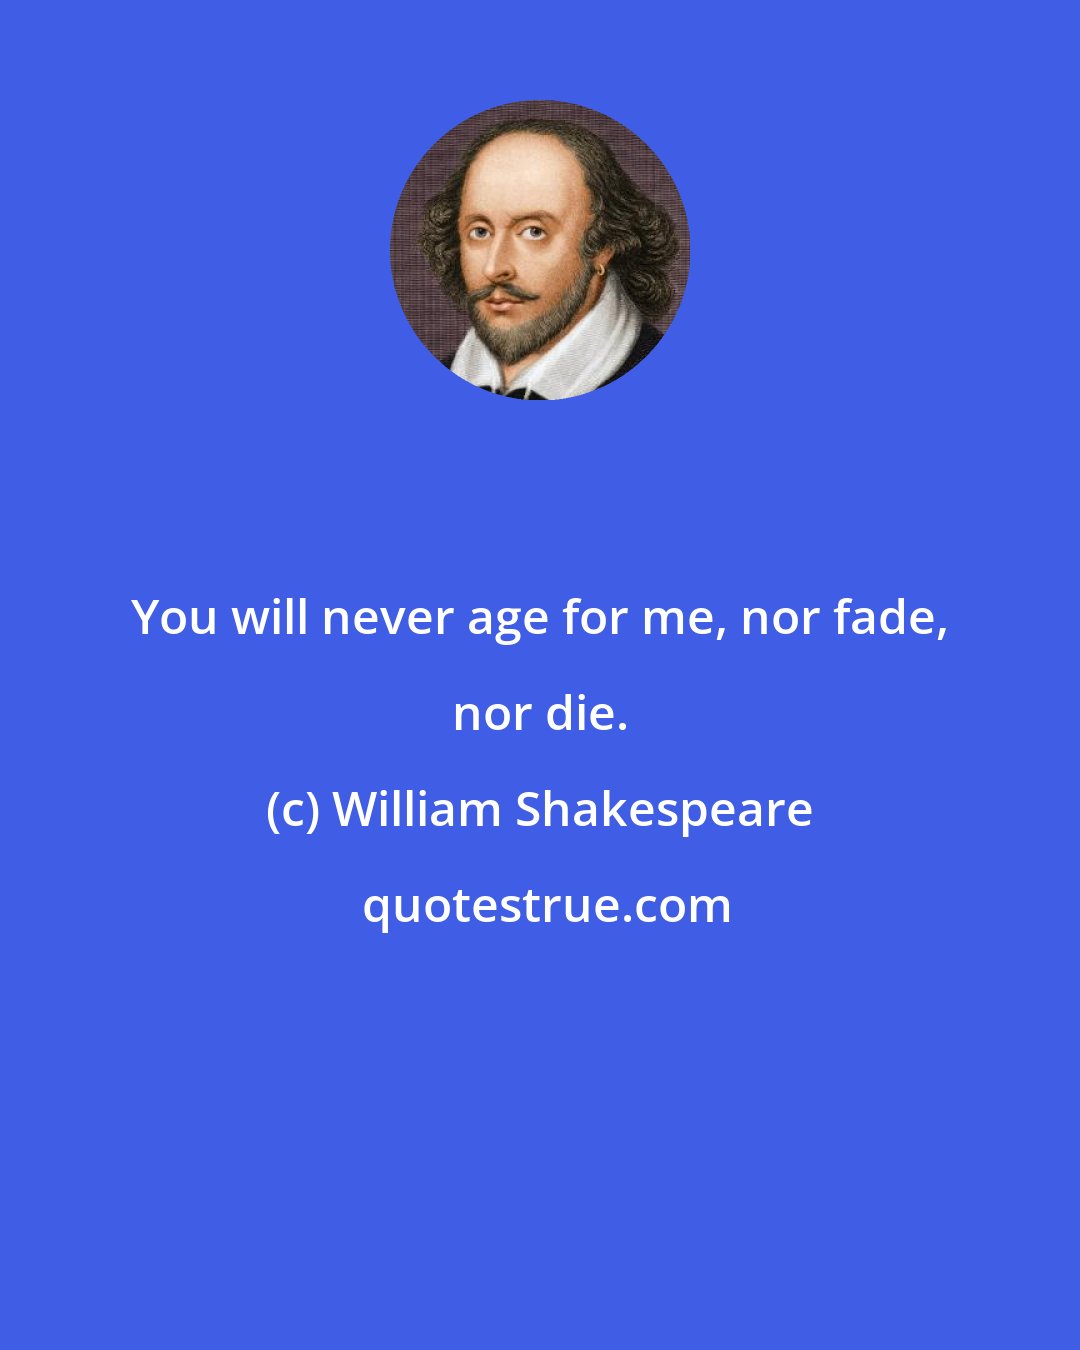 William Shakespeare: You will never age for me, nor fade, nor die.